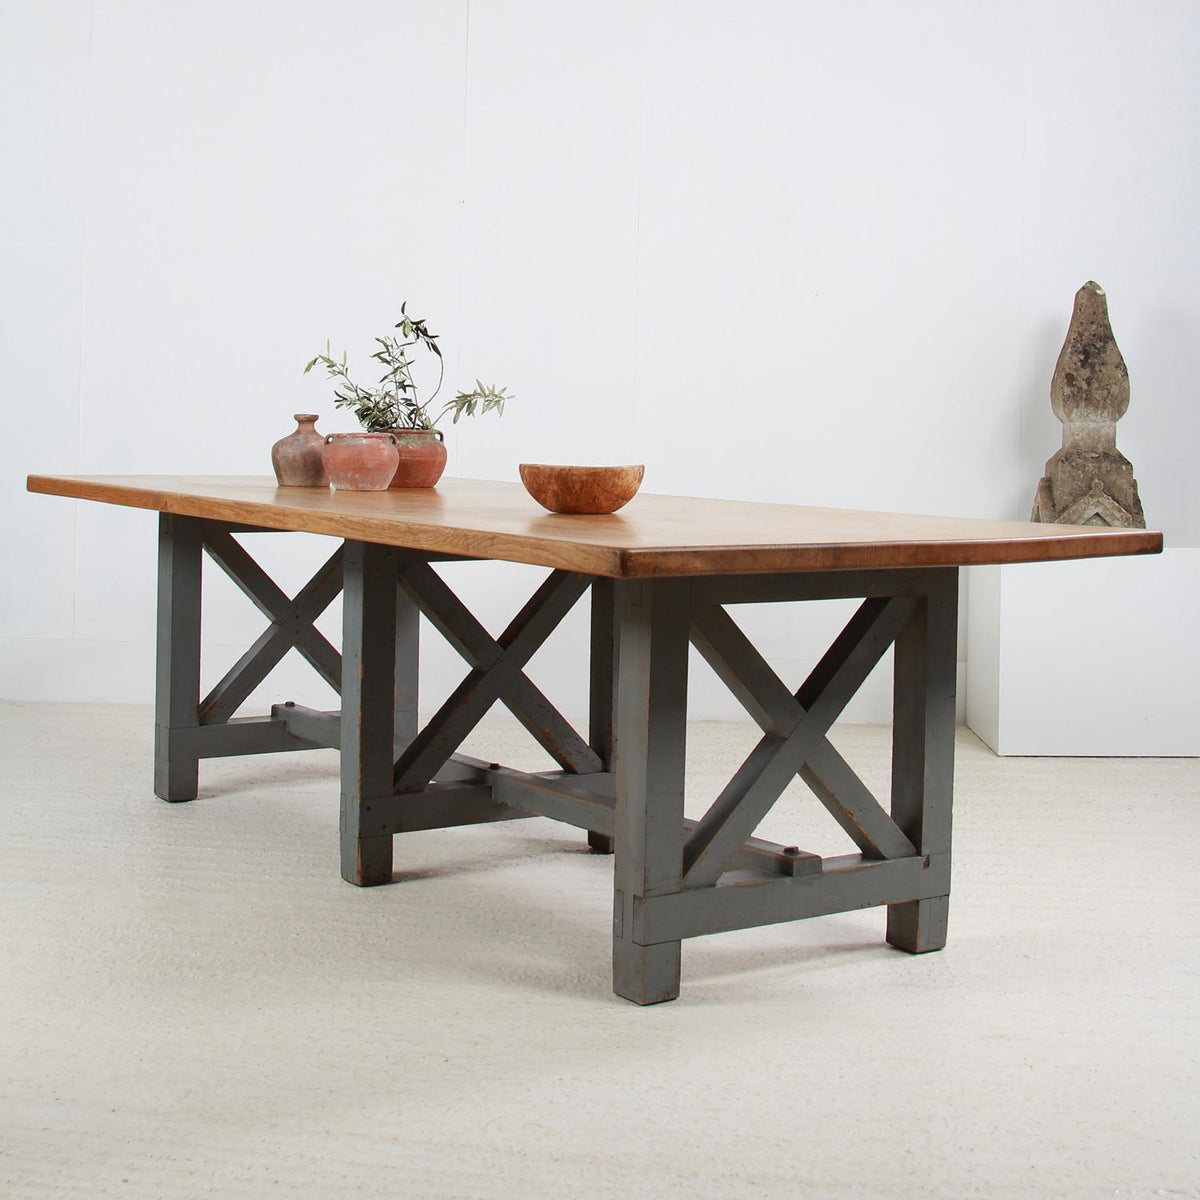 Massive Oak 20thC X- Frame Refectory Dining Table with Painted Base